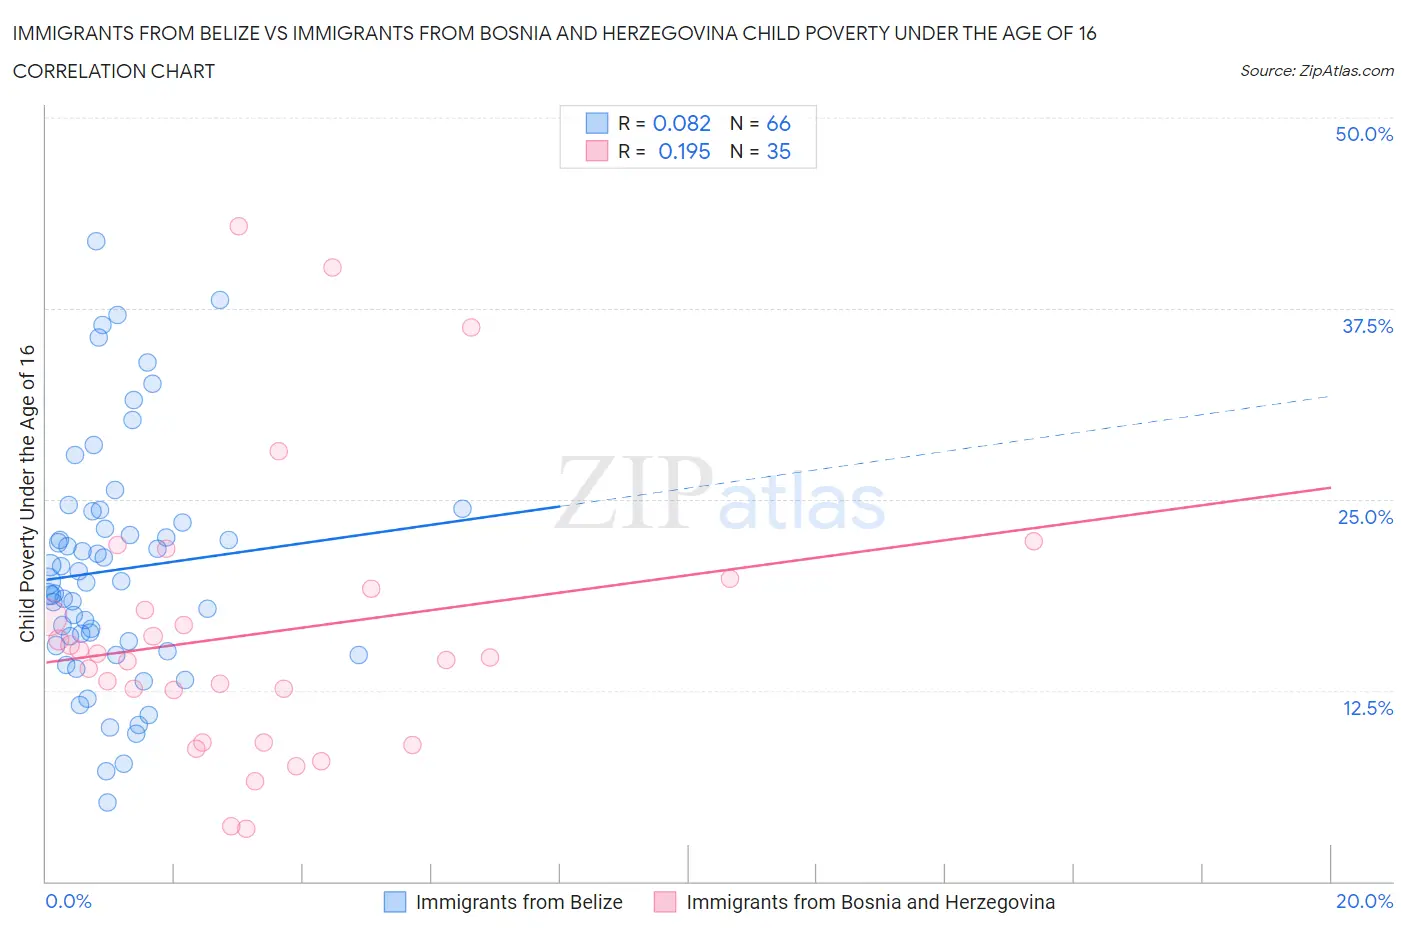 Immigrants from Belize vs Immigrants from Bosnia and Herzegovina Child Poverty Under the Age of 16